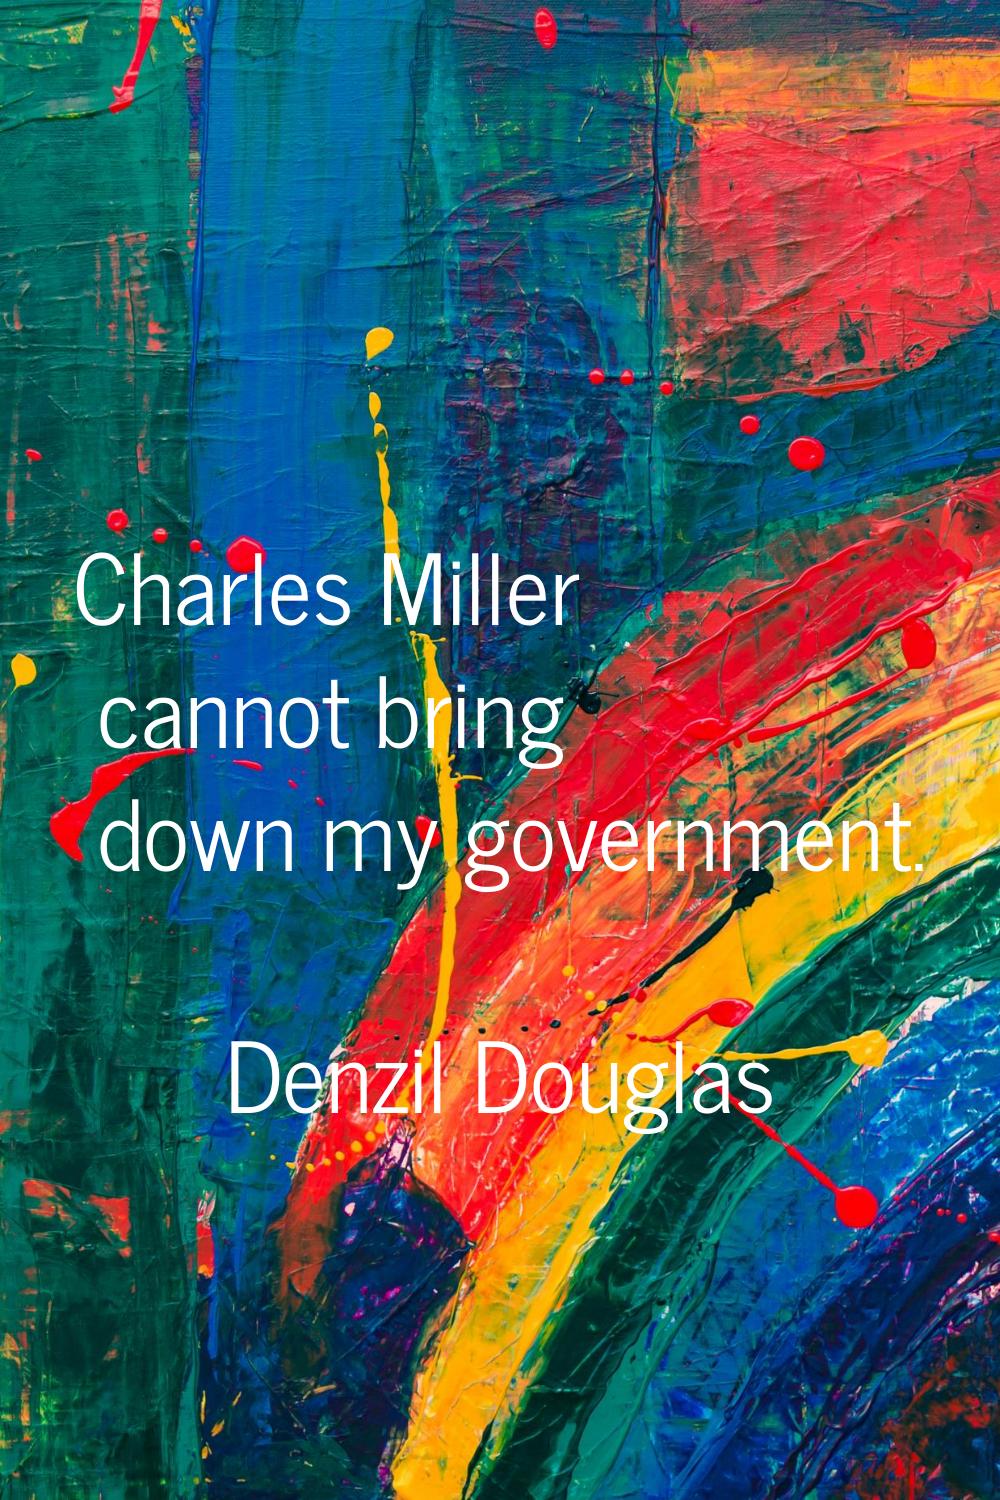 Charles Miller cannot bring down my government.